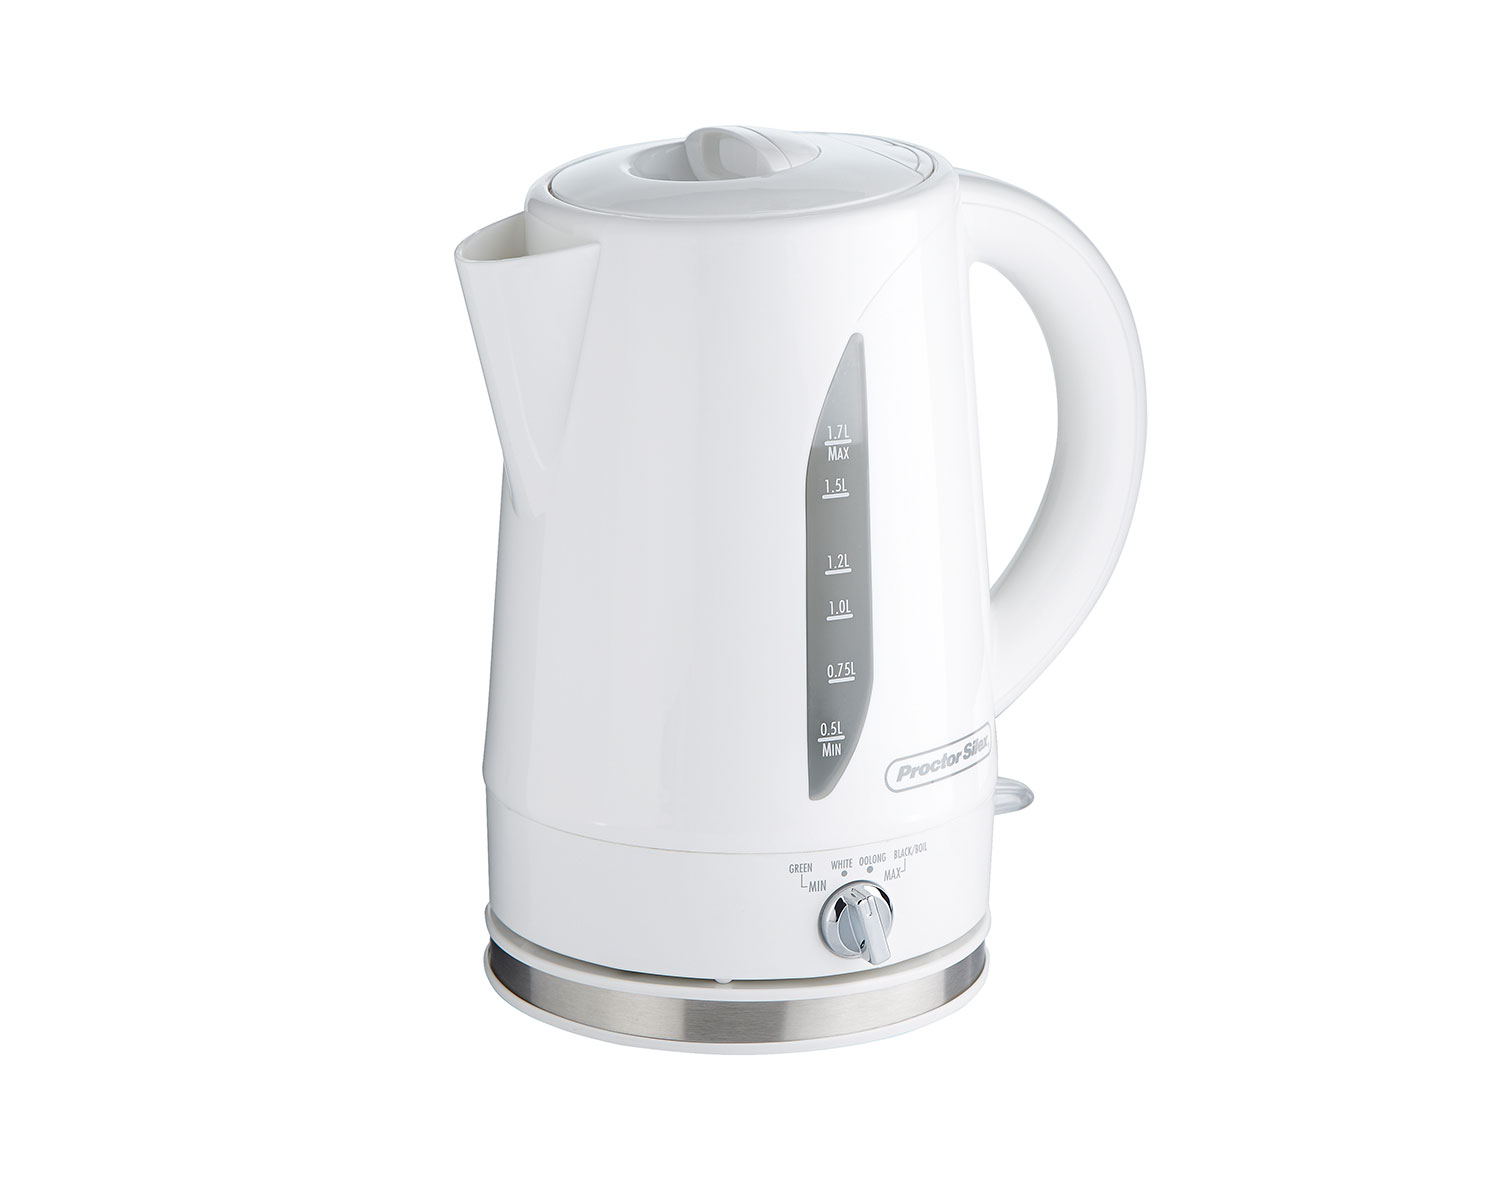 Pre-Owned Proctor Silex 1 Liter White Electric Portable Tea Kettle